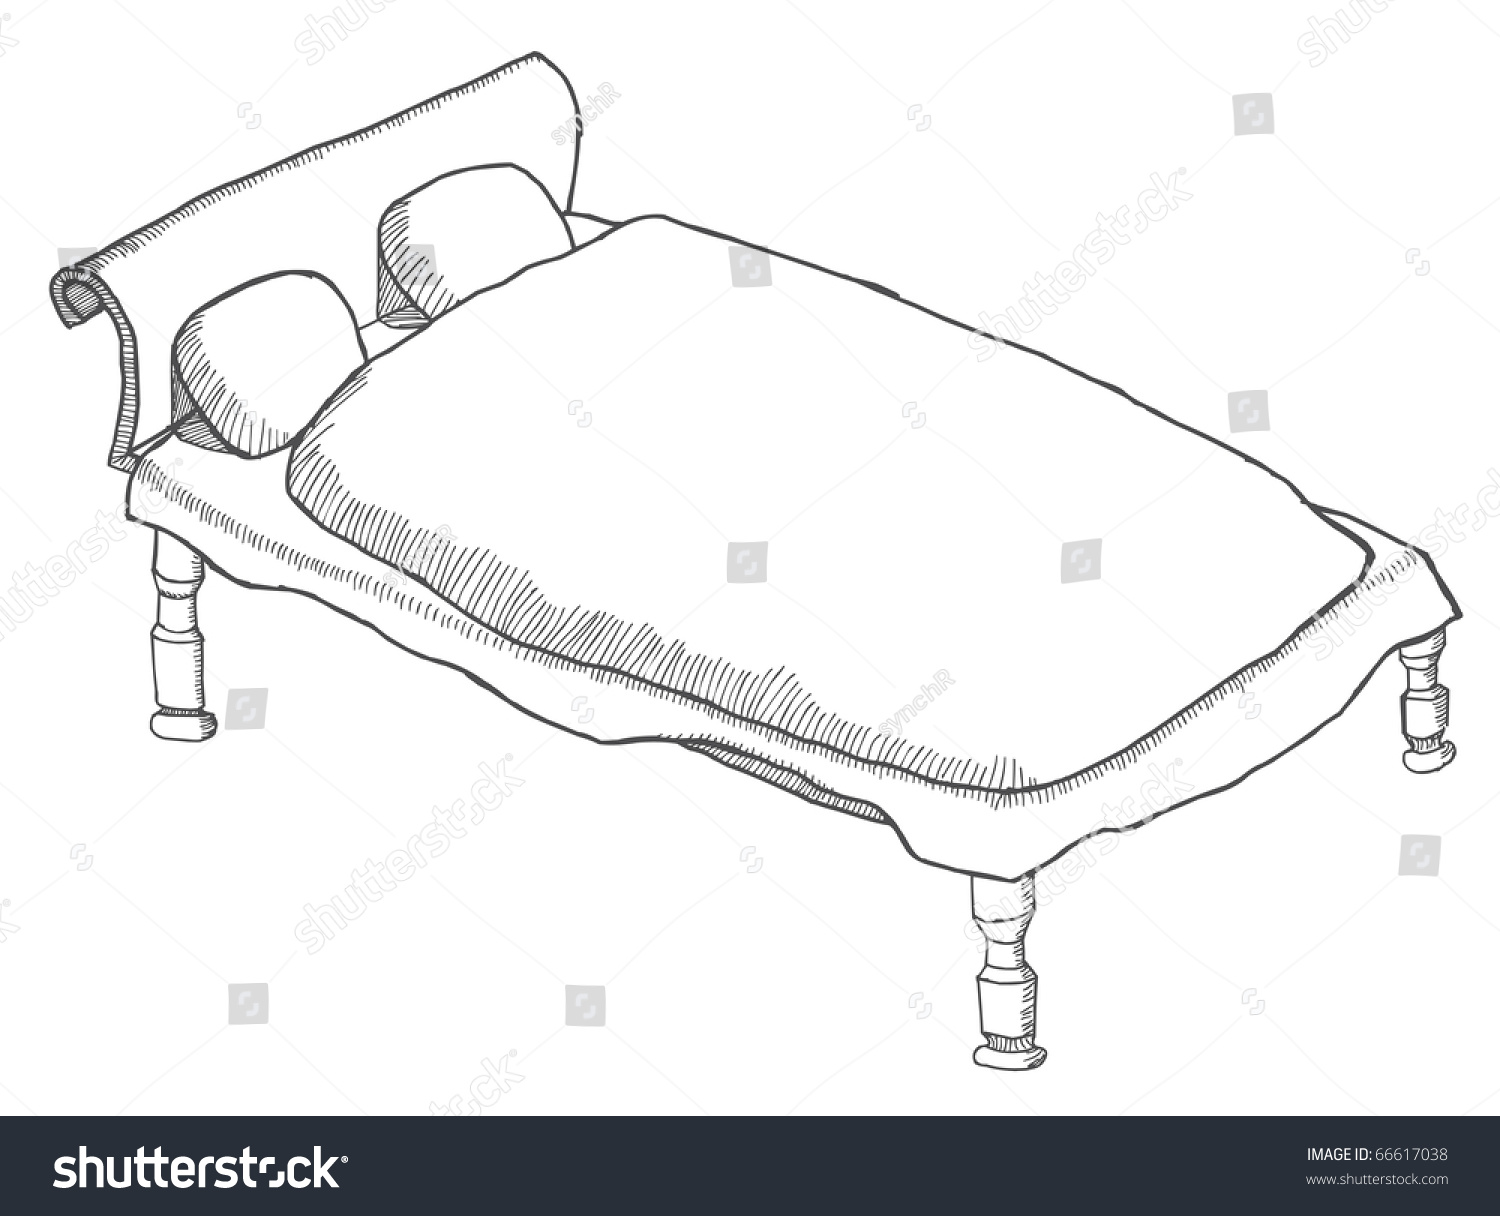 Drawn Bed And Sketched Stock Vector Illustration 66617038 : Shutterstock